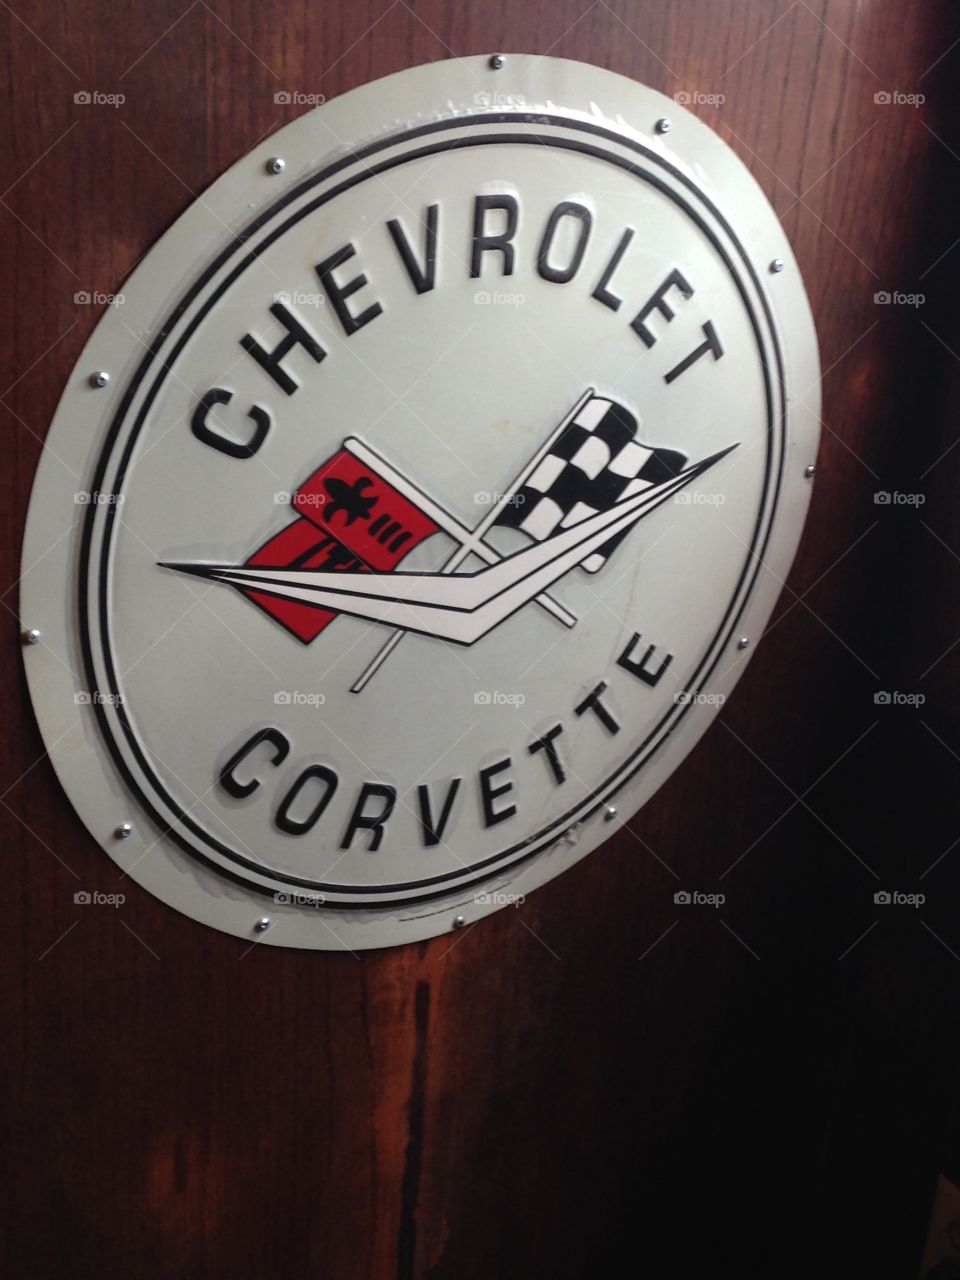 Vintage Chevrolet Corvette round metal sign on wood wall